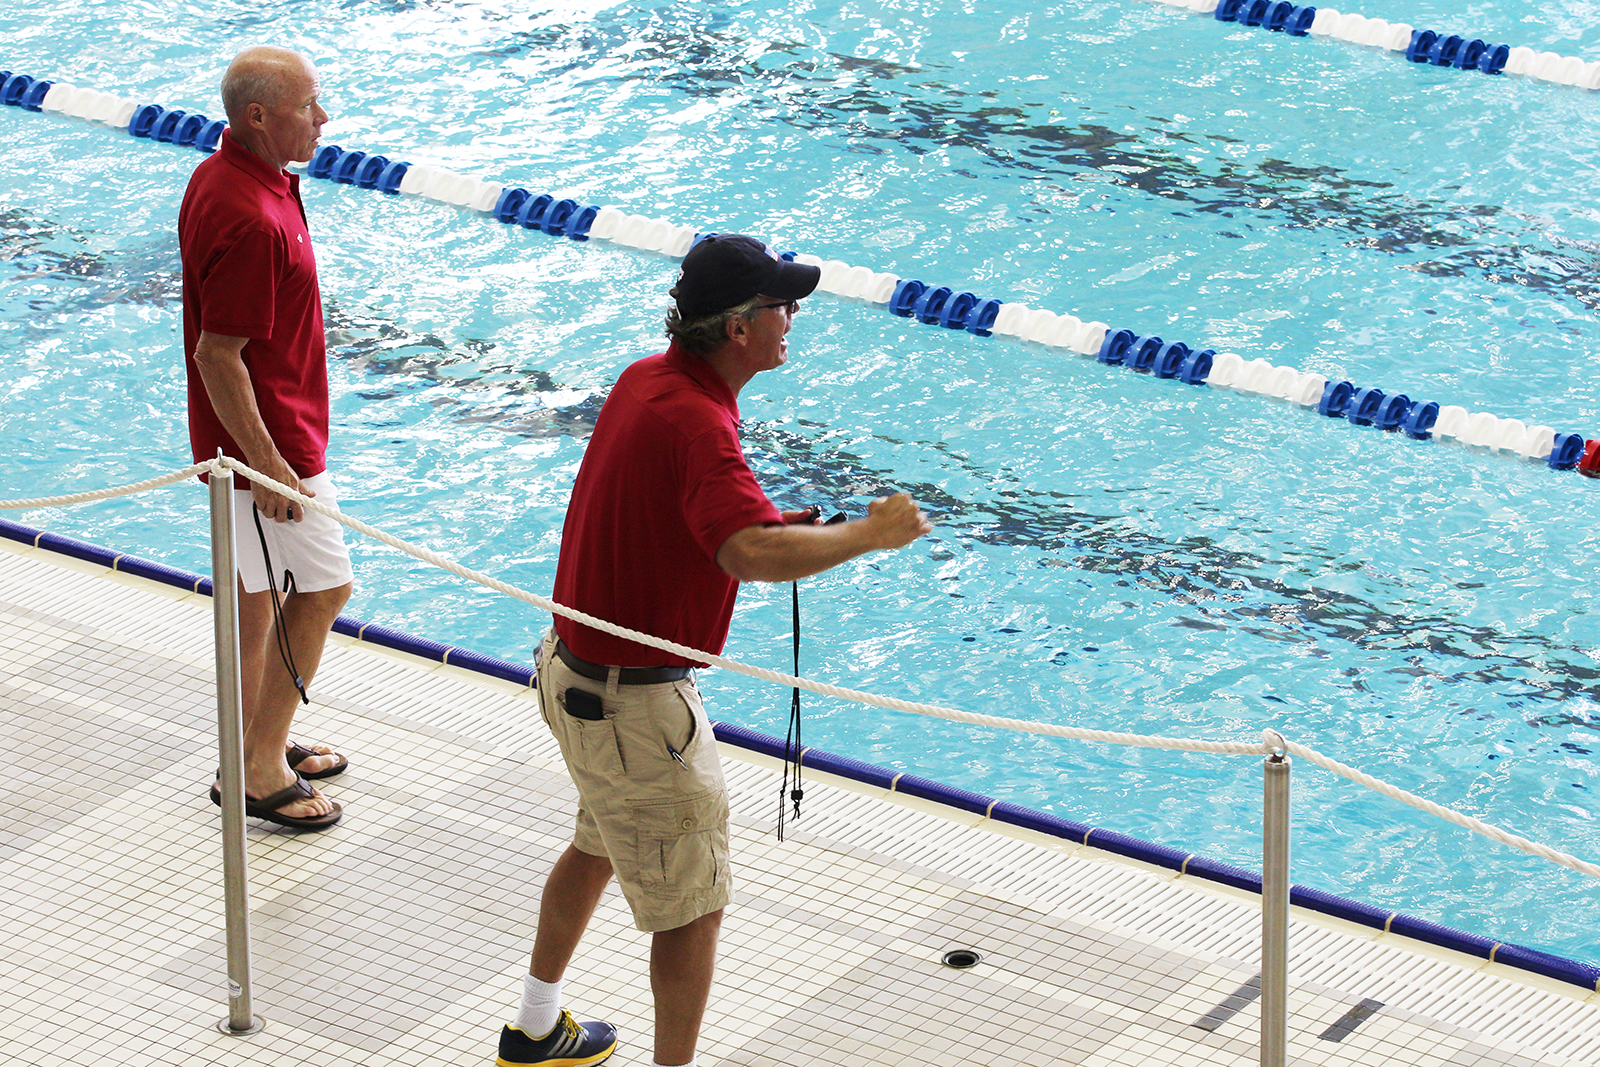 Jack Bauerle and Mike Bottom, assistant coaches for the U.S. Men's Olympic Swimming Team, cheer on the team at an open practice at Georgia Tech's McAuley Aquatic Center on July 30, 2016